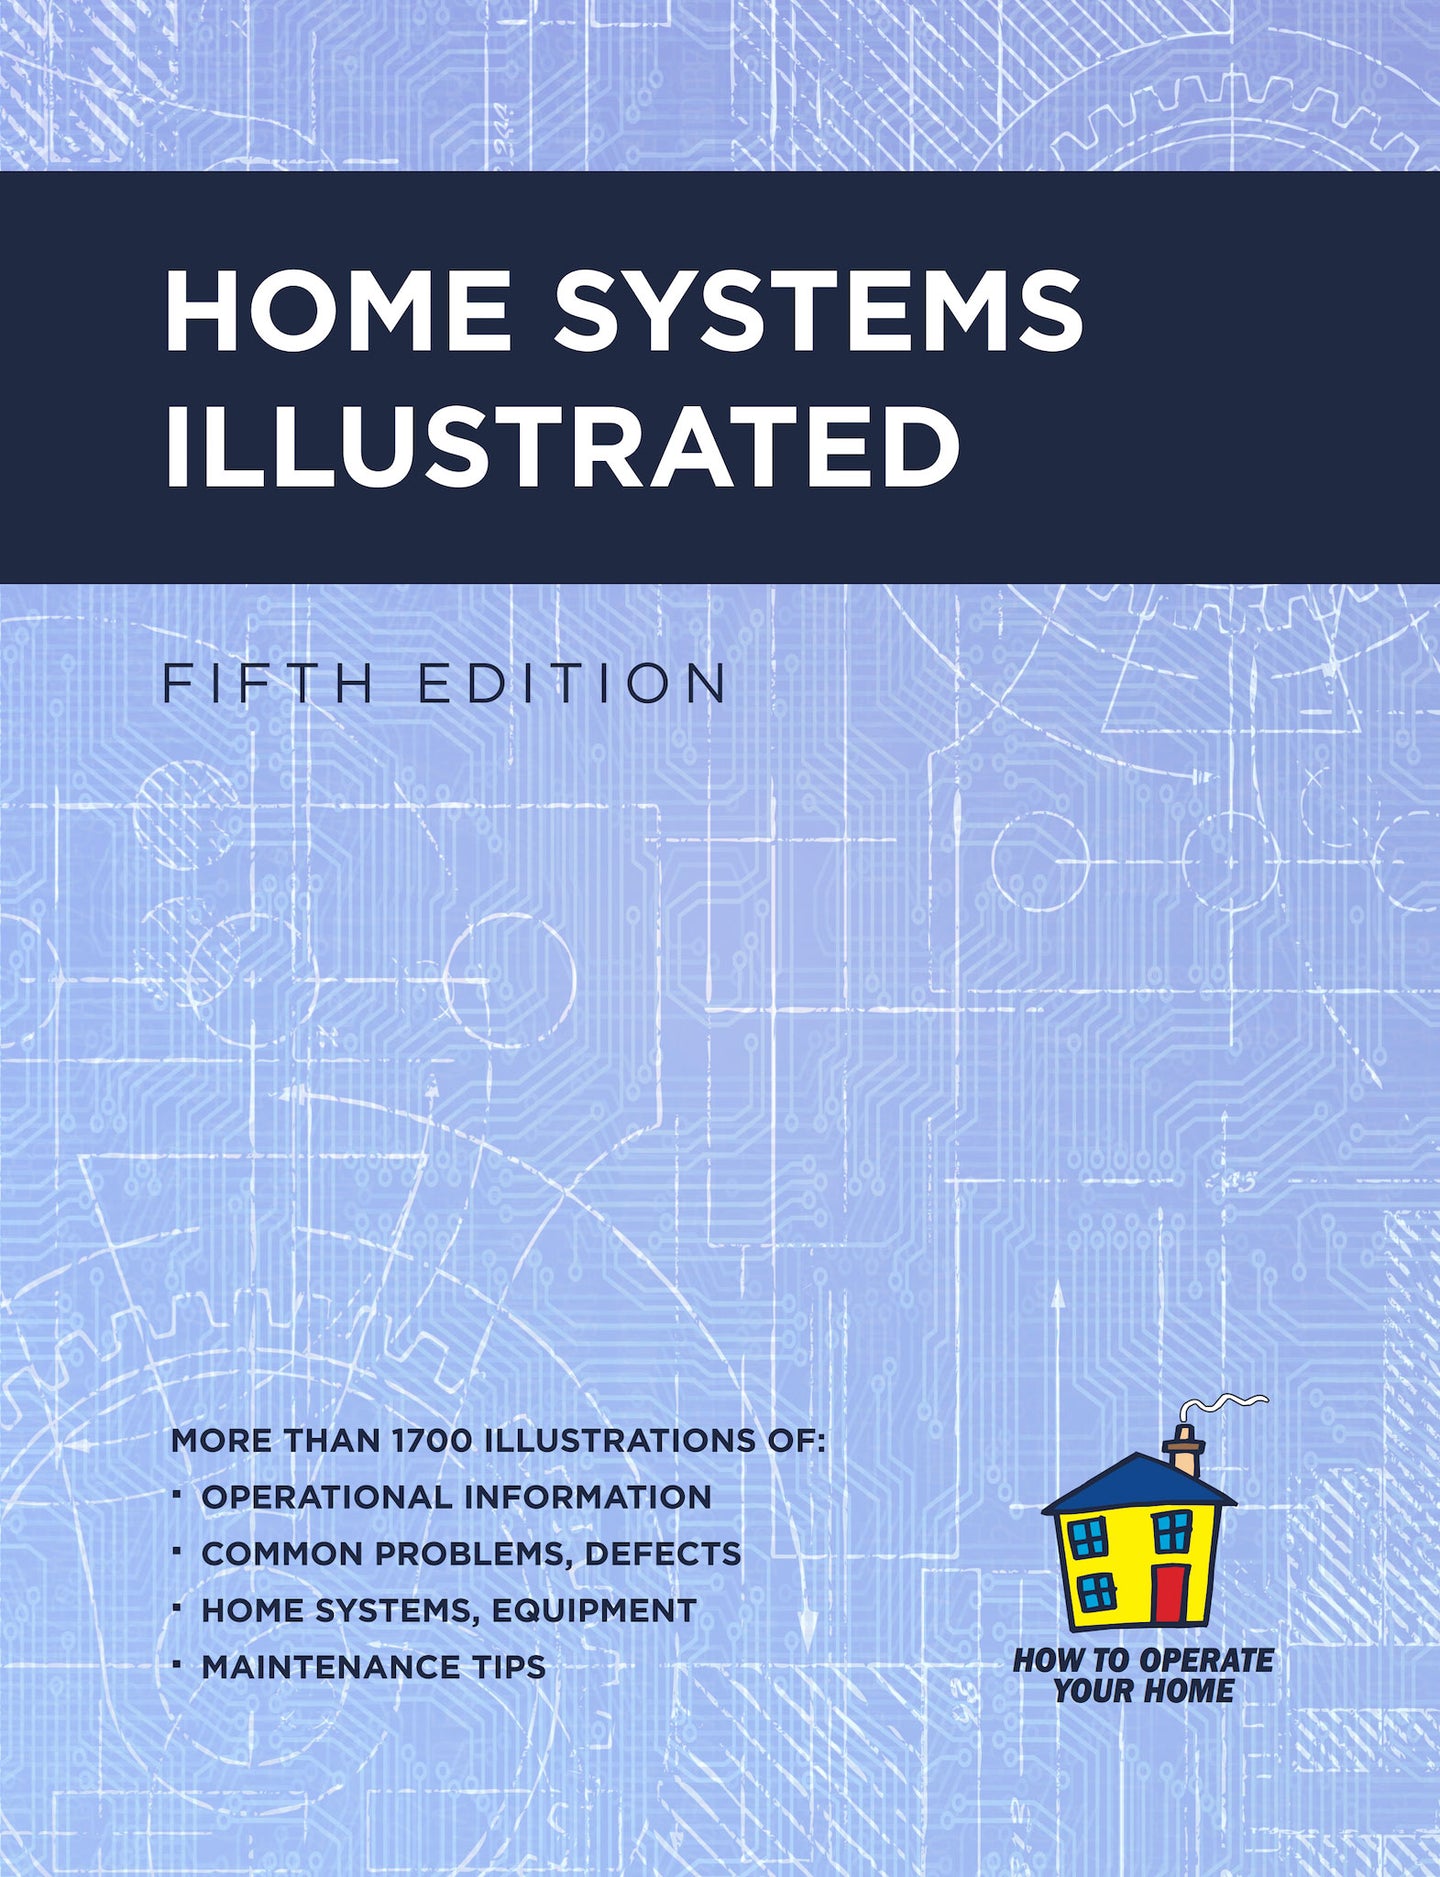 Home Systems Illustrated - 1,700+ Digital Image Collection (Plus Reference Manual)